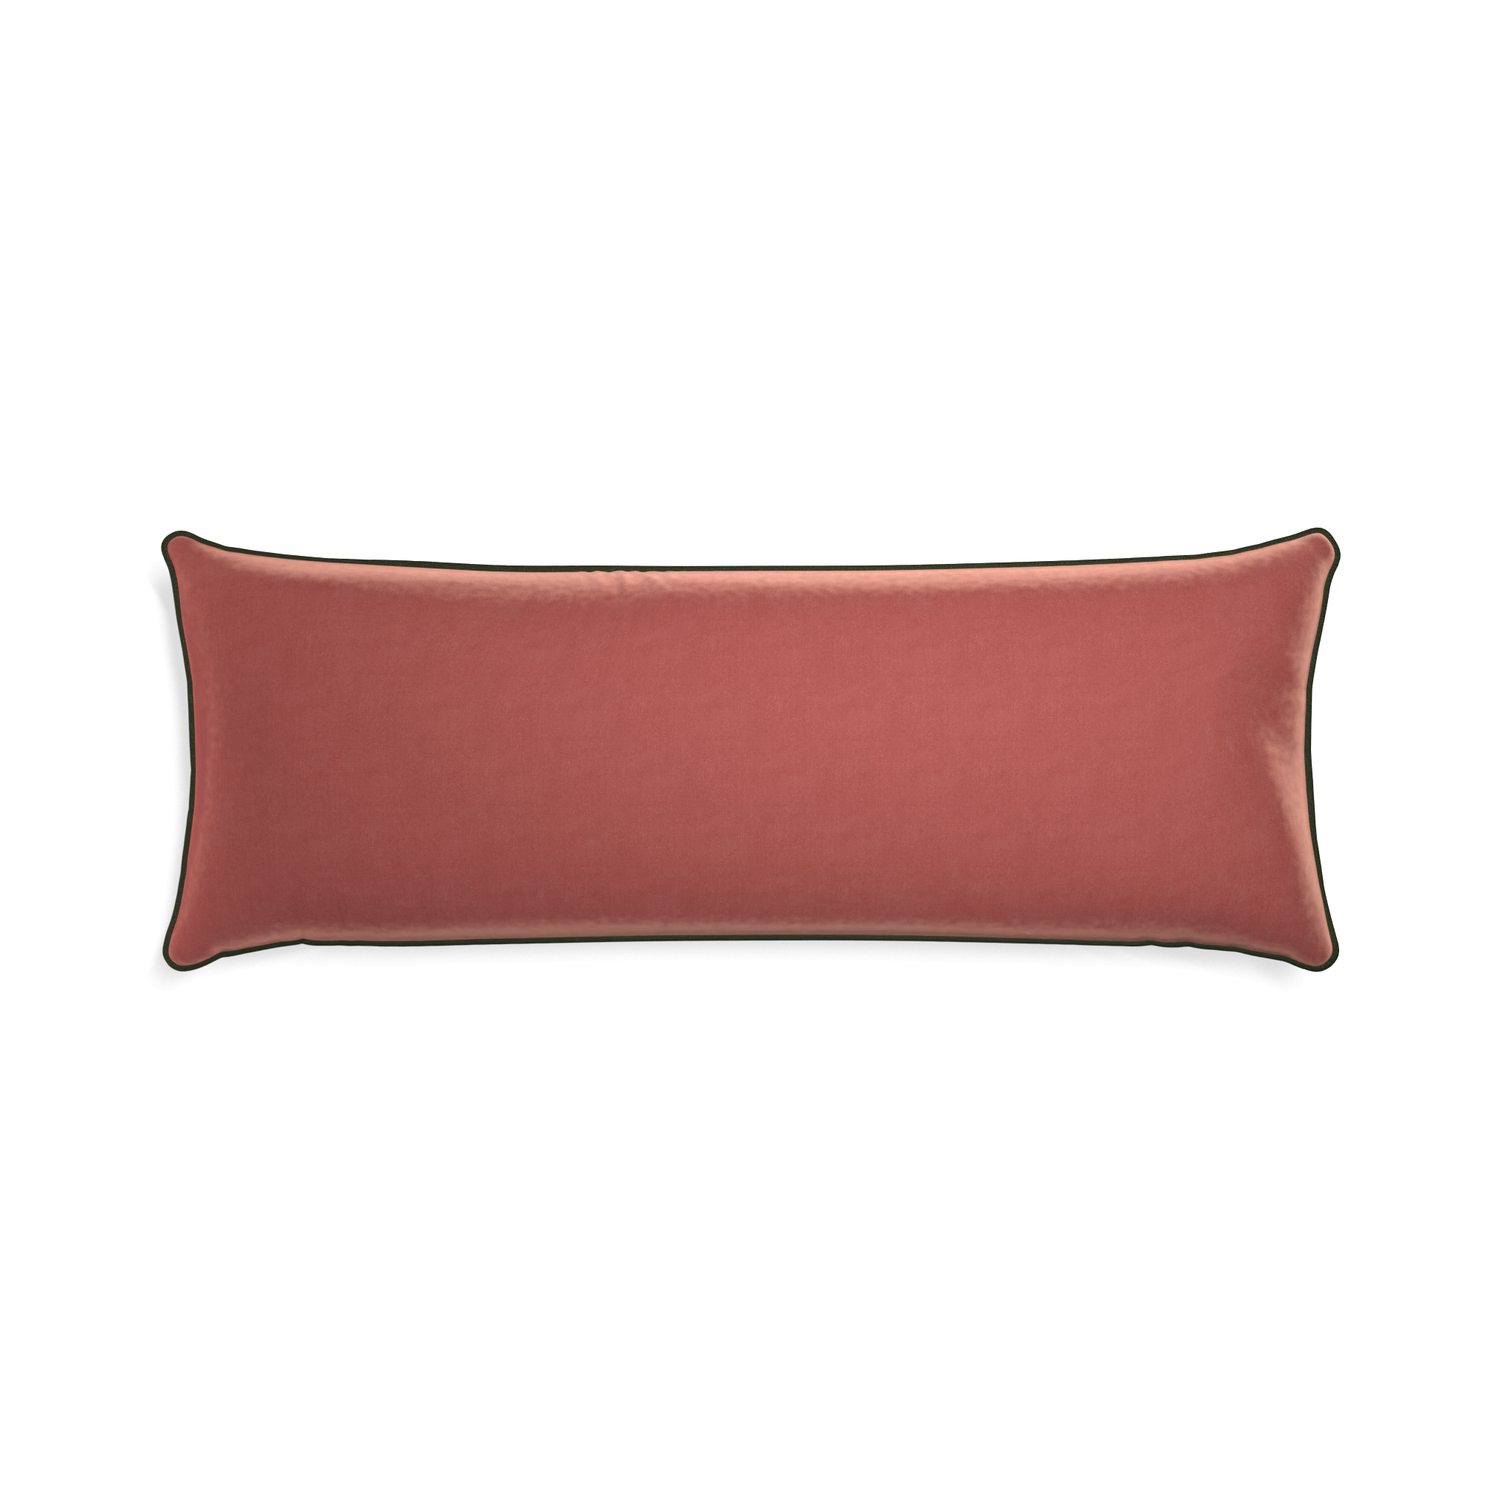 square coral velvet pillow with fern green piping